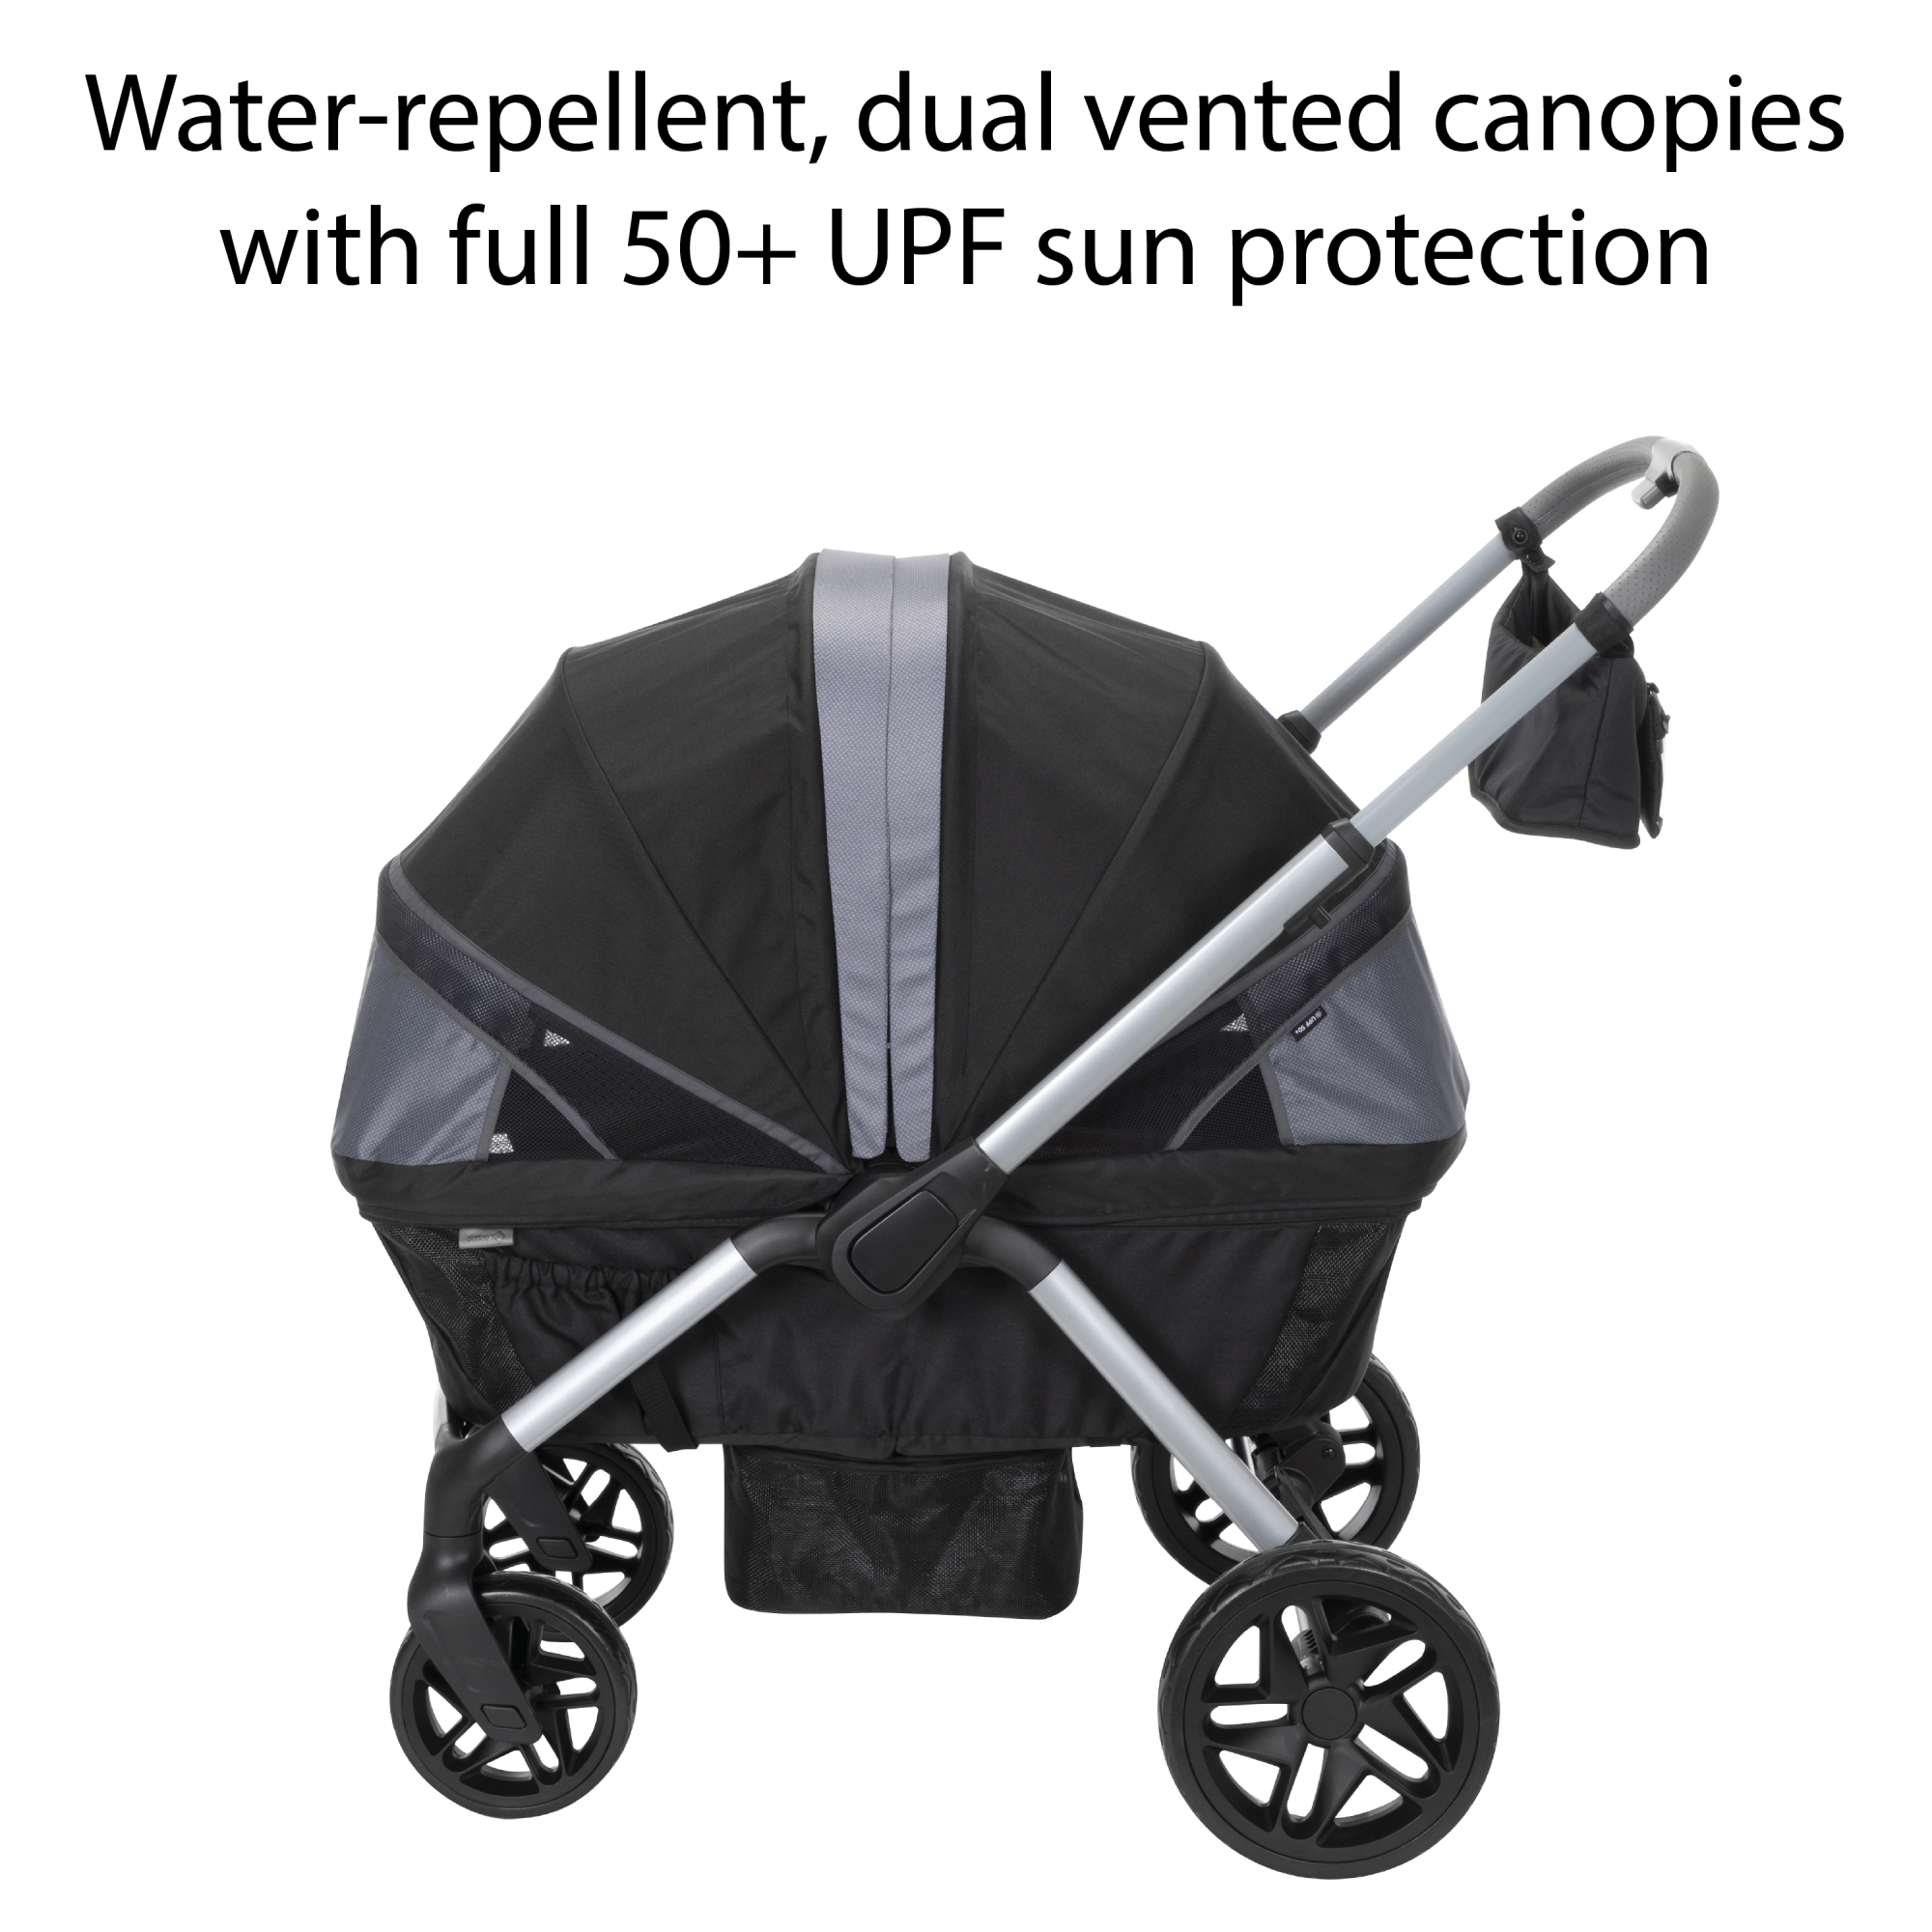 Summit Wagon Stroller - holds an additional 10 lbs. of storage for a maximum weight of 120 lbs.